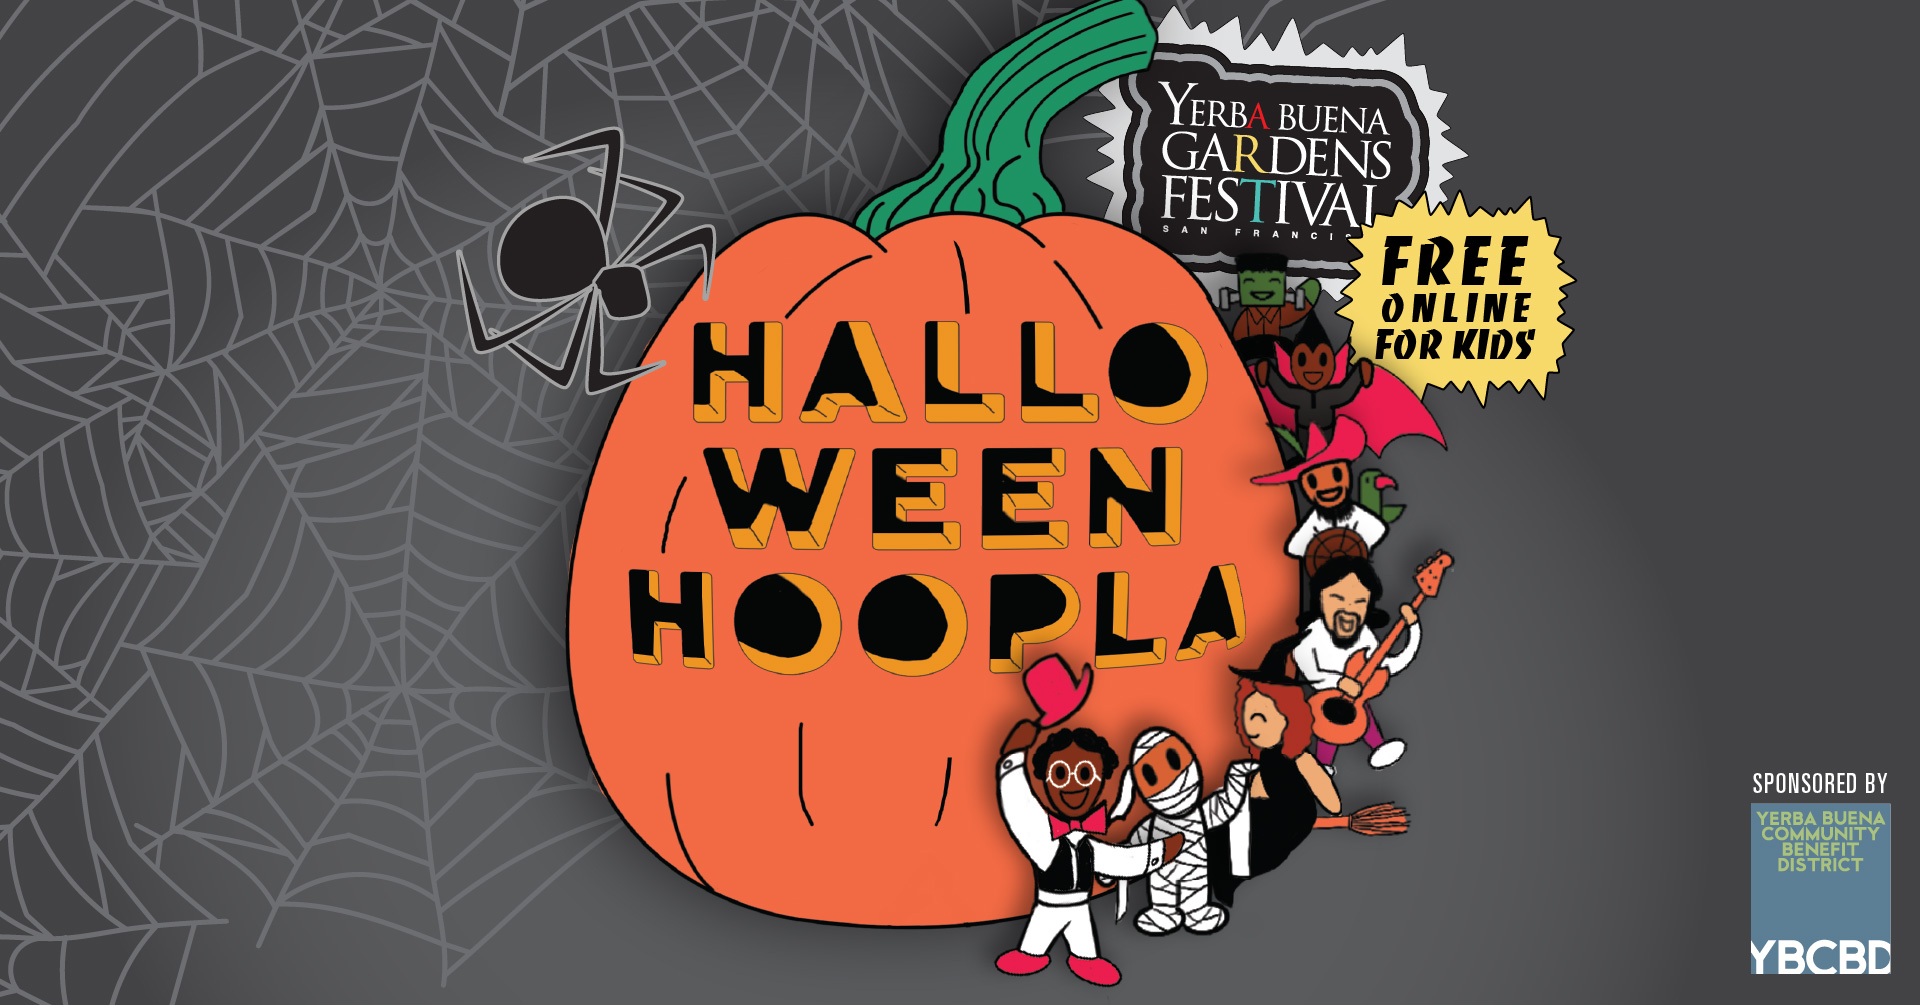 Colorful cartoon illustration of small kids figures in costume, dancing around a giant pumpkin that says "Halloween Hoopla."